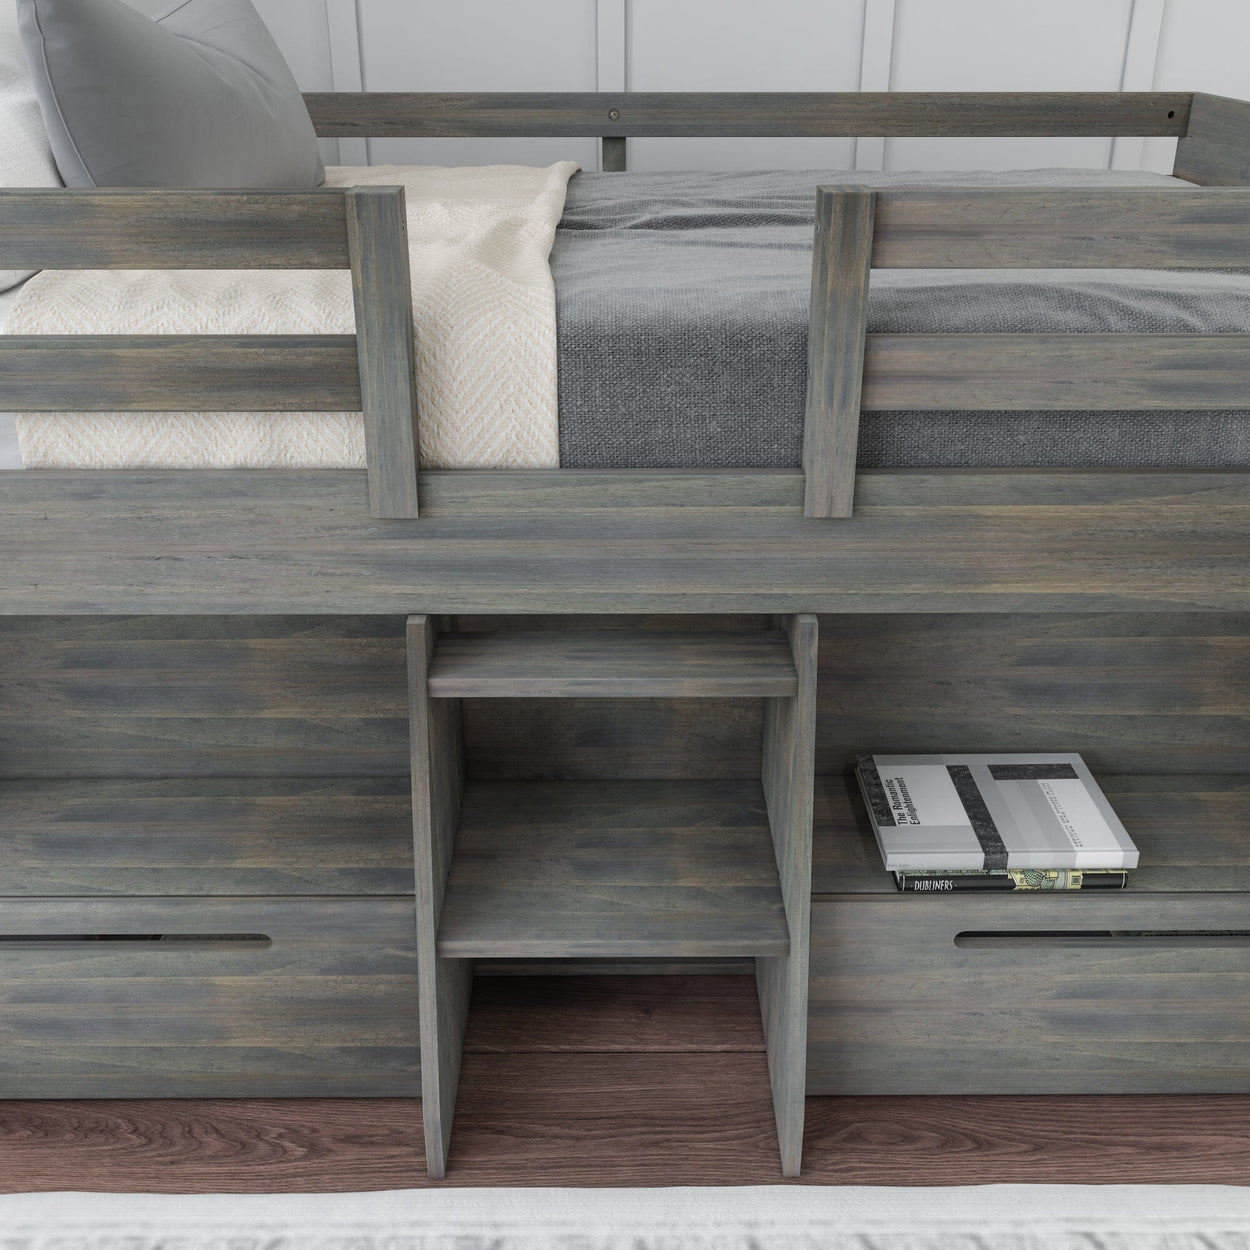 Loft Beds Max & Lily Modern Farmhouse Twin-Size Low Loft with Two Drawers 